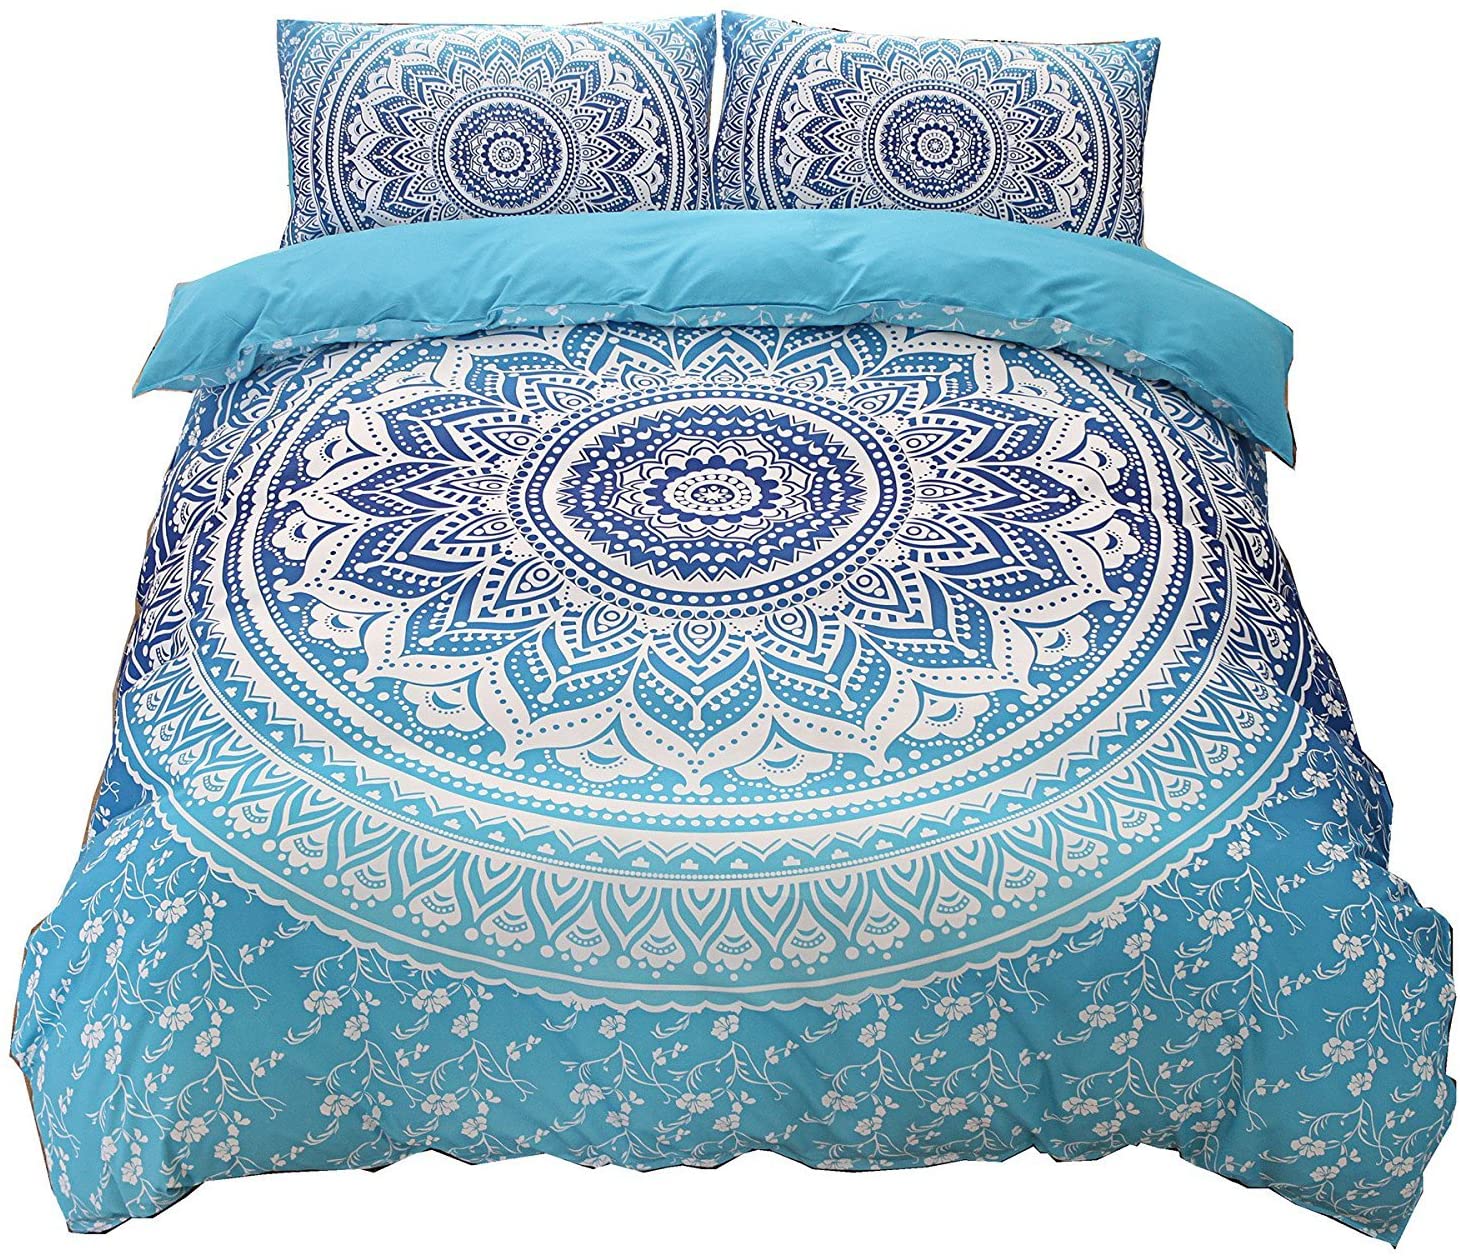 4 Of The Most Beautiful Mandala Comforters, You'll Want For Your Bedroom